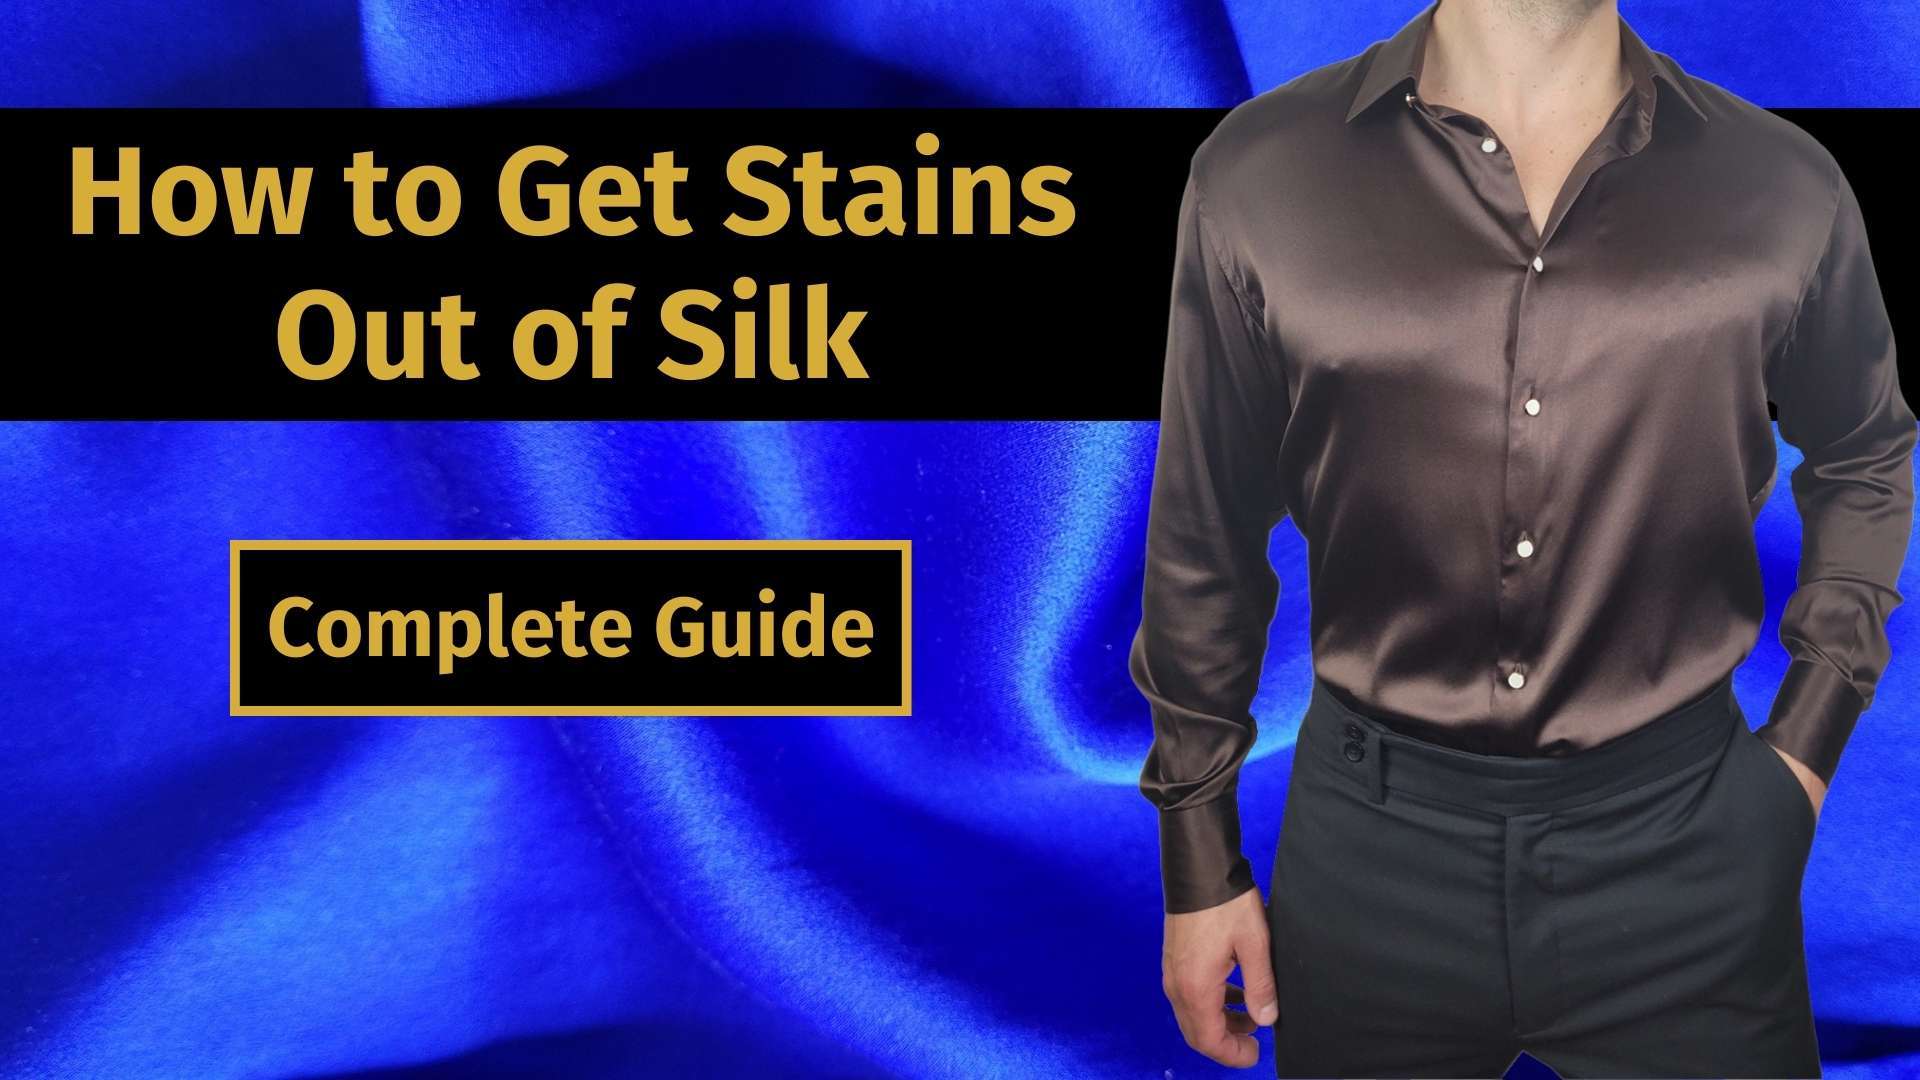 how to get stains out of silk banner image